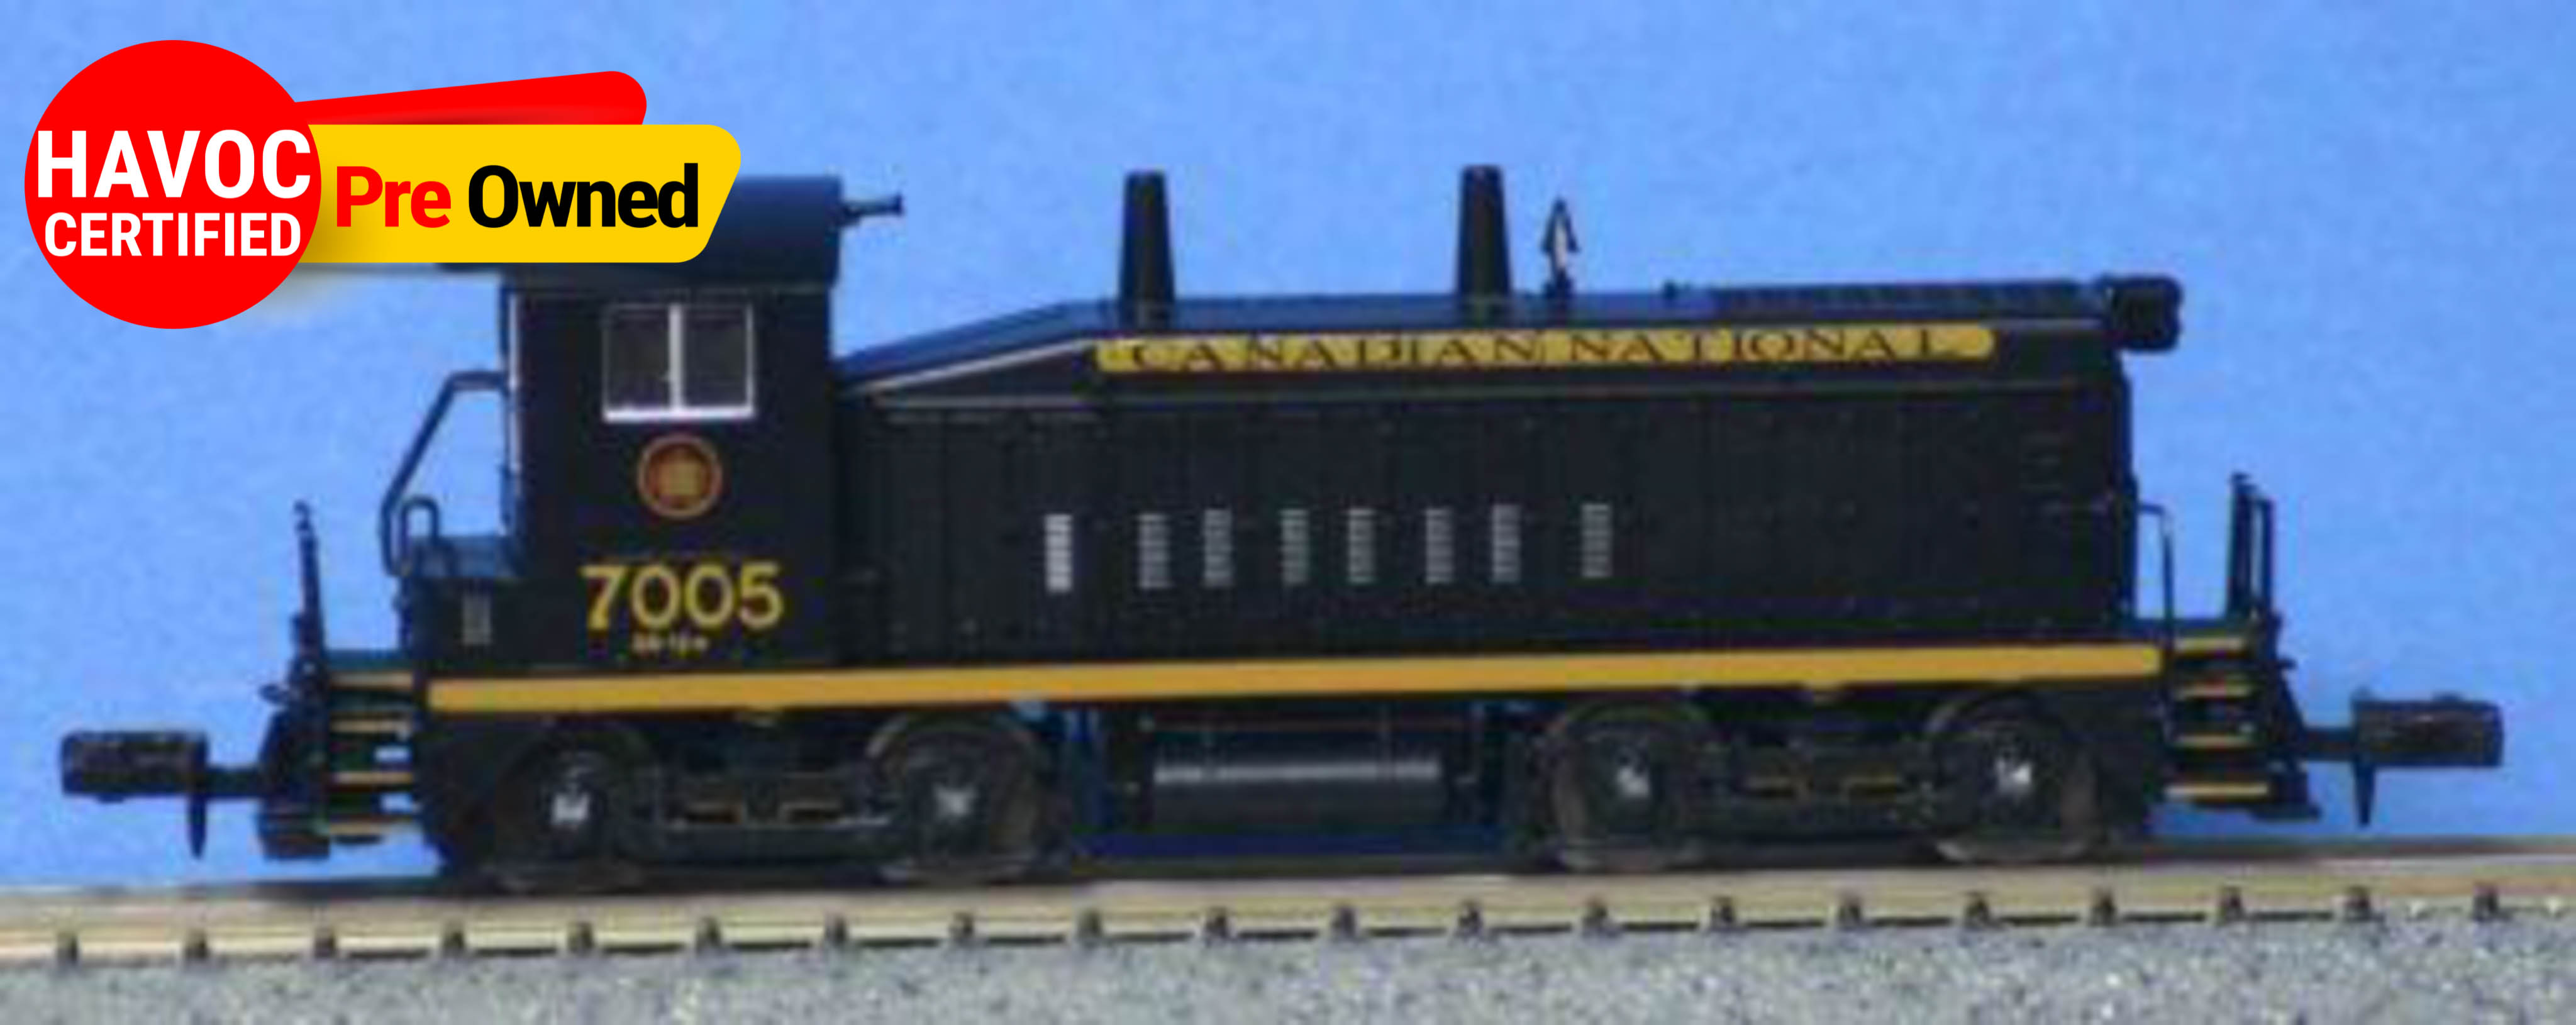 N Scale Canadian National Locomotive-7005 (Quality Pre Owned)